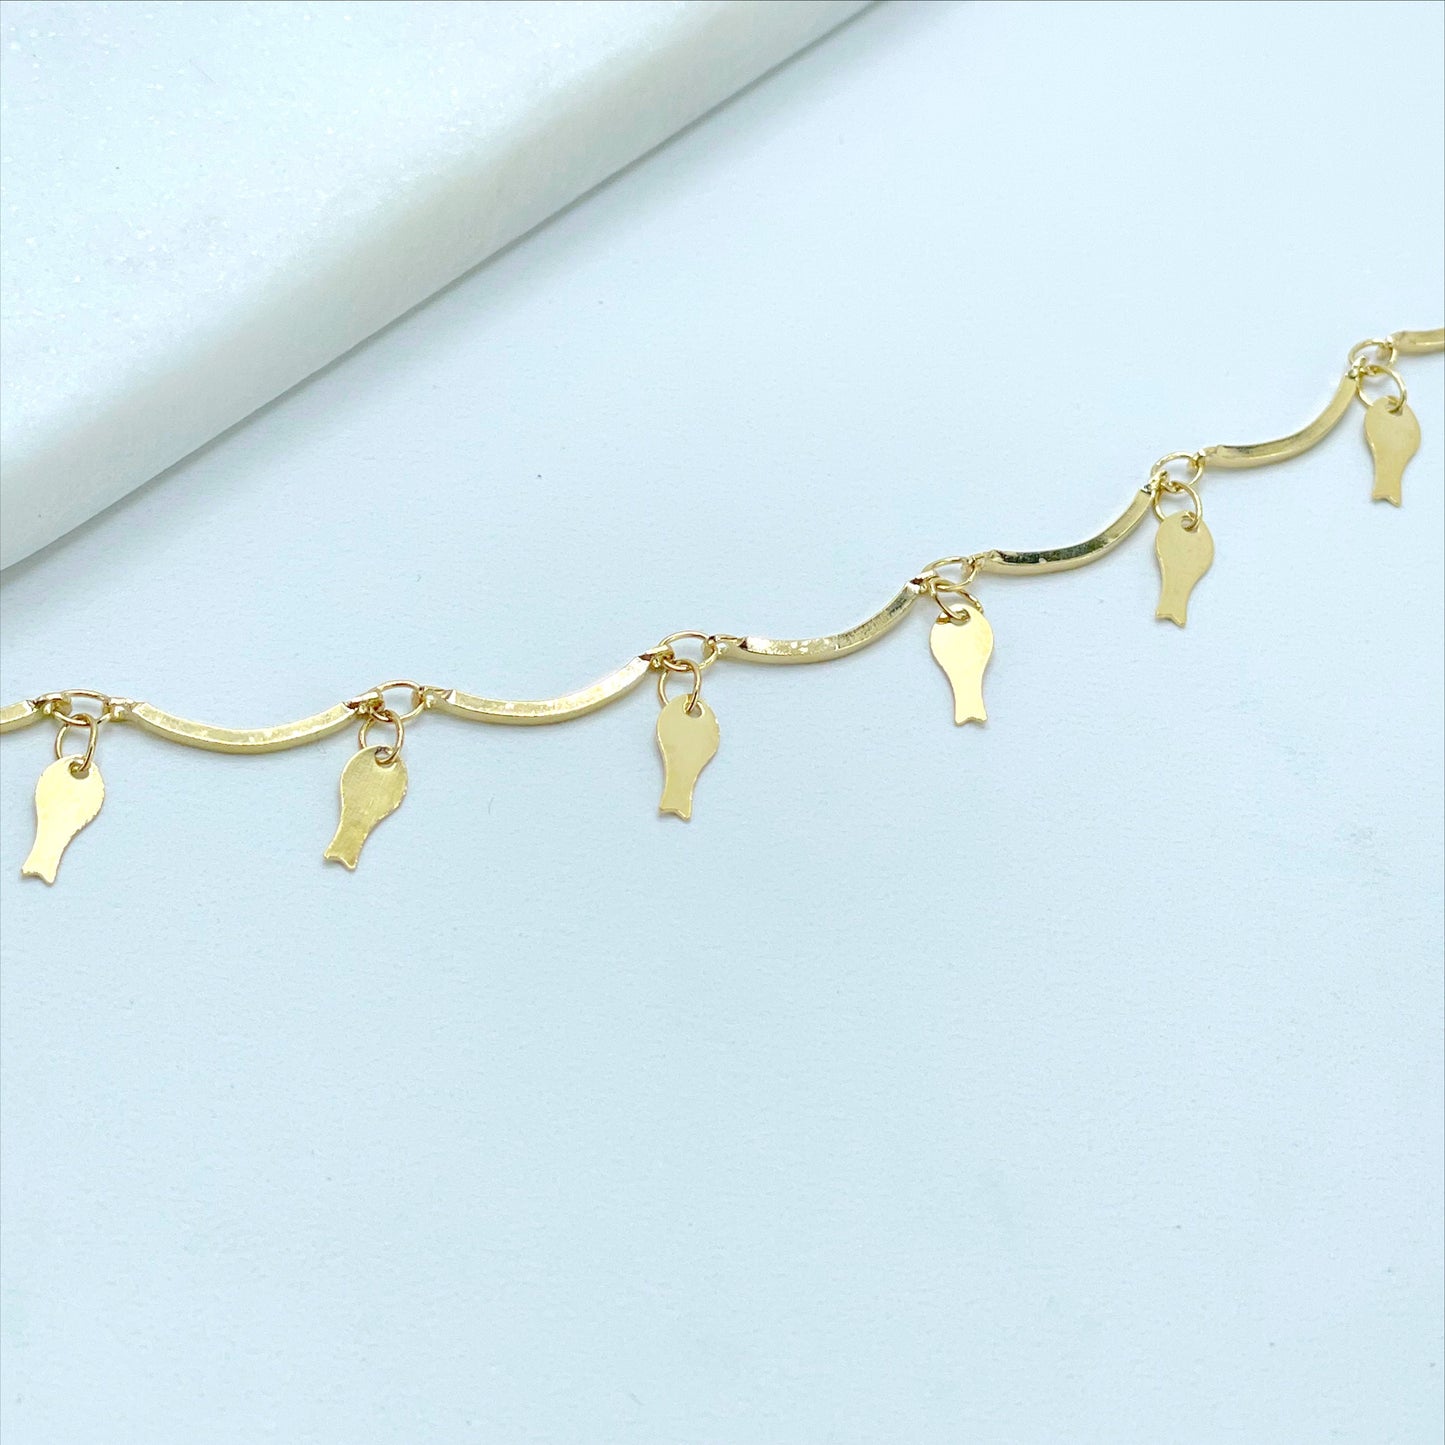 18k Gold Filled Wave Link, Key Charms Anklet Wholesale Jewelry Supplies